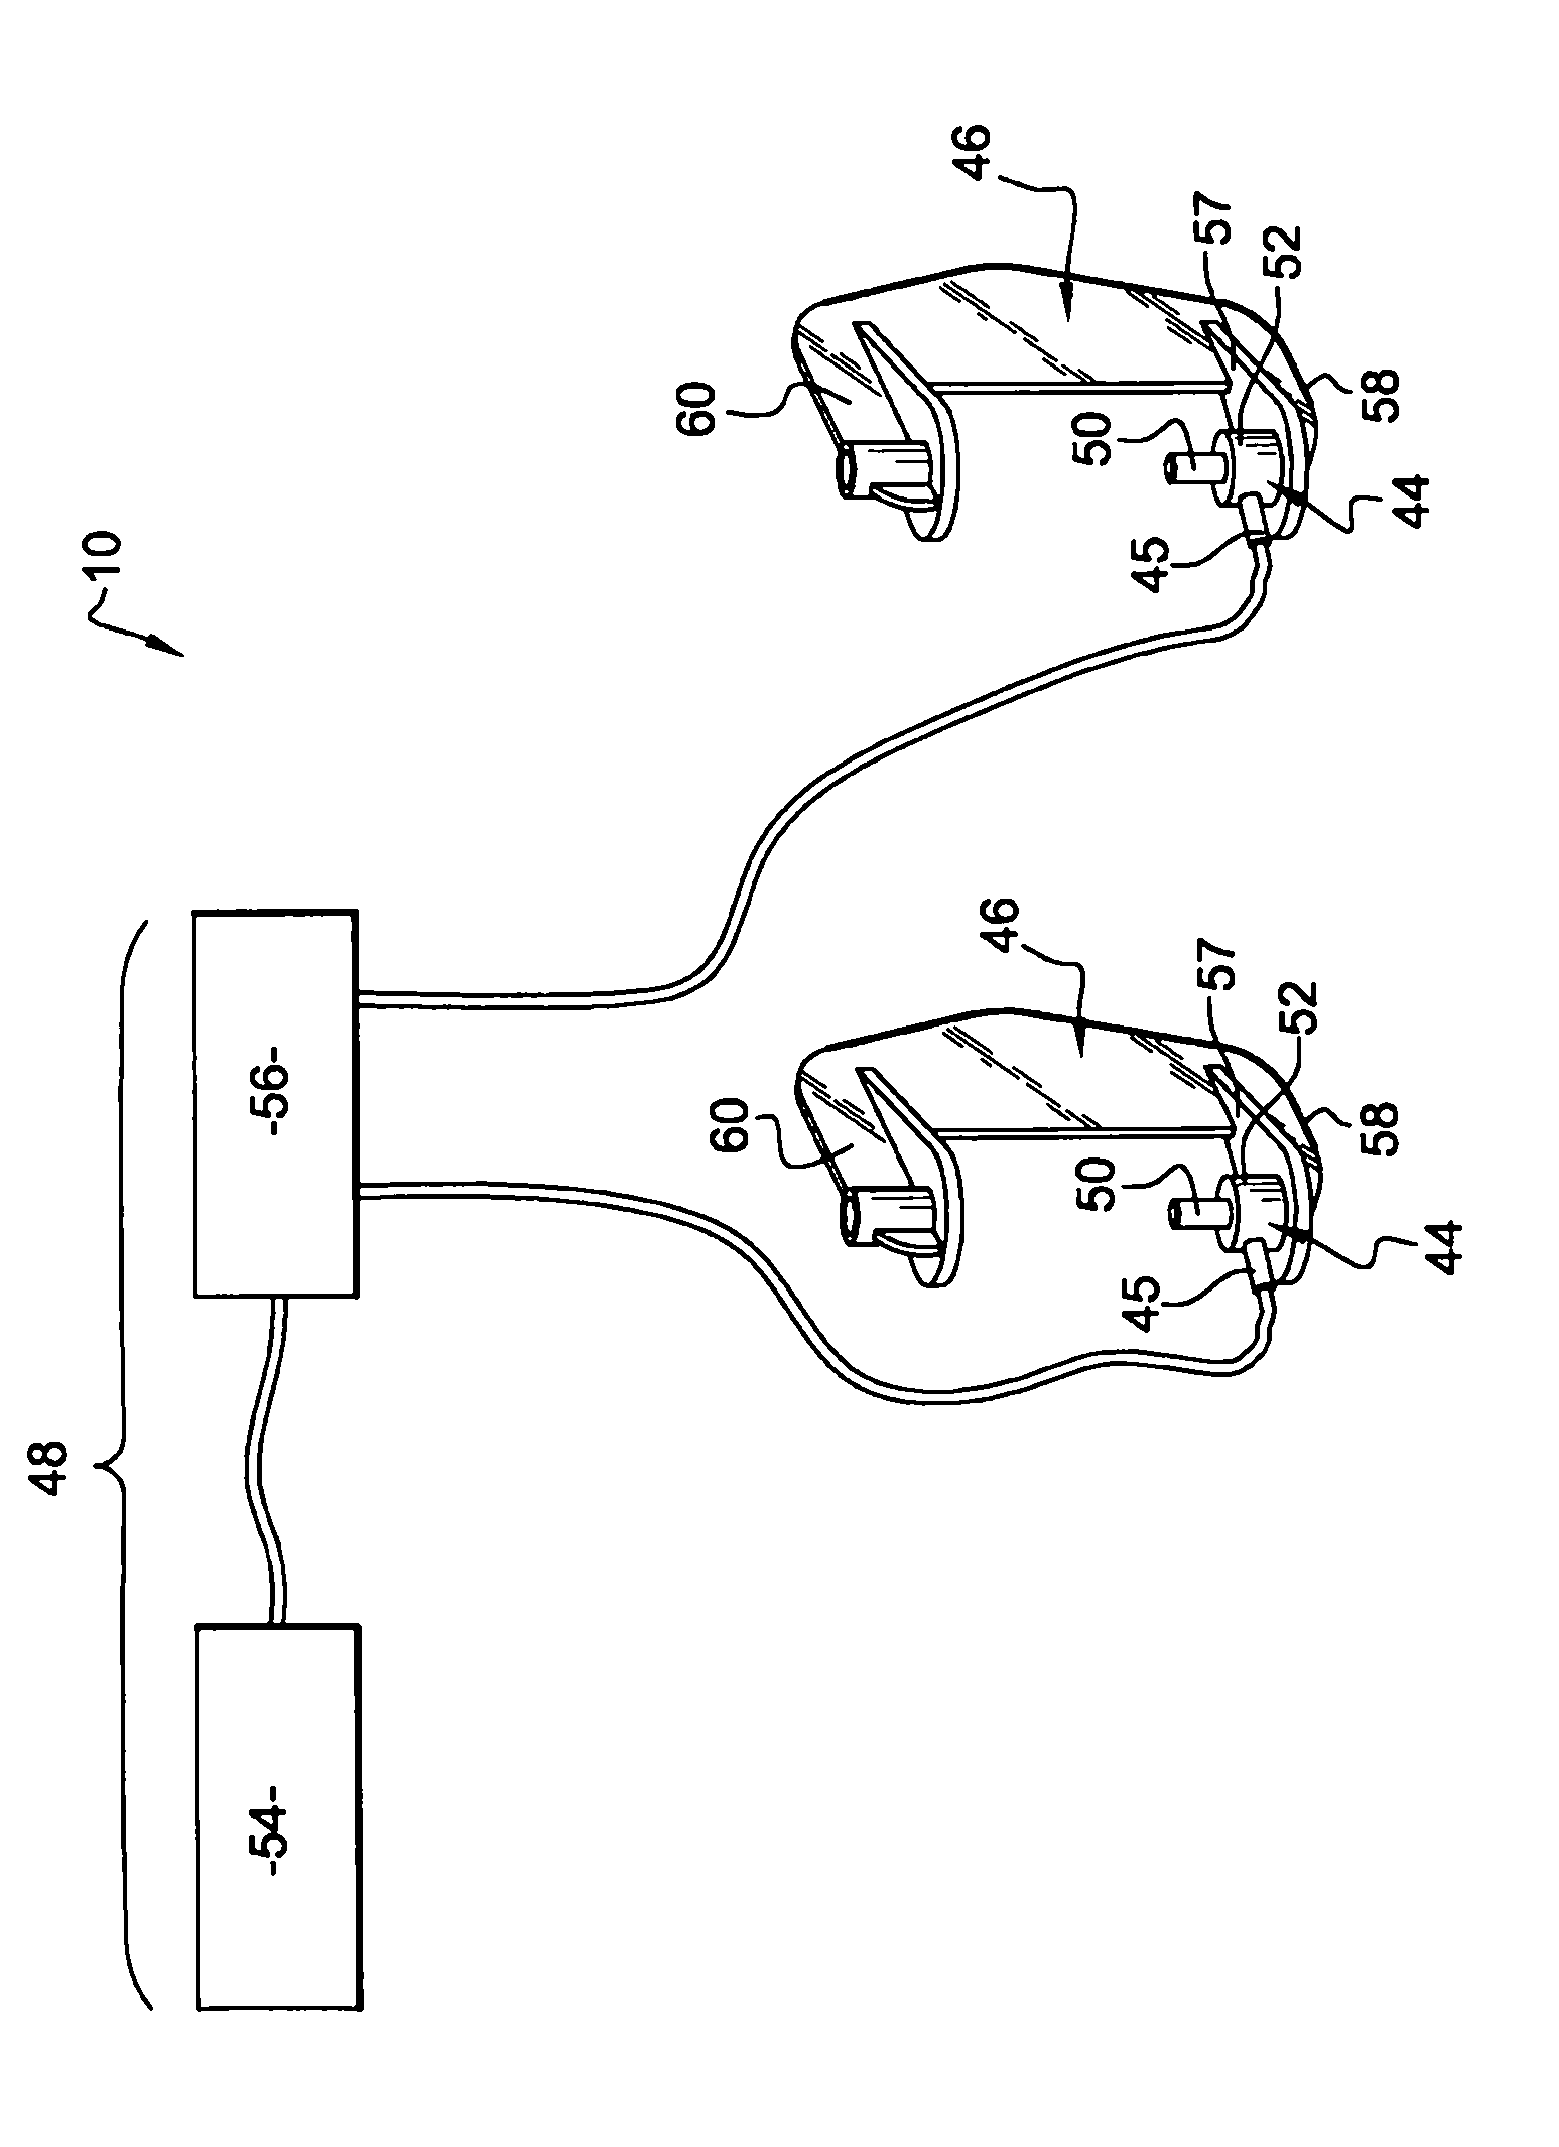 Improvement to device for inserting and extracting chain link pivot pins